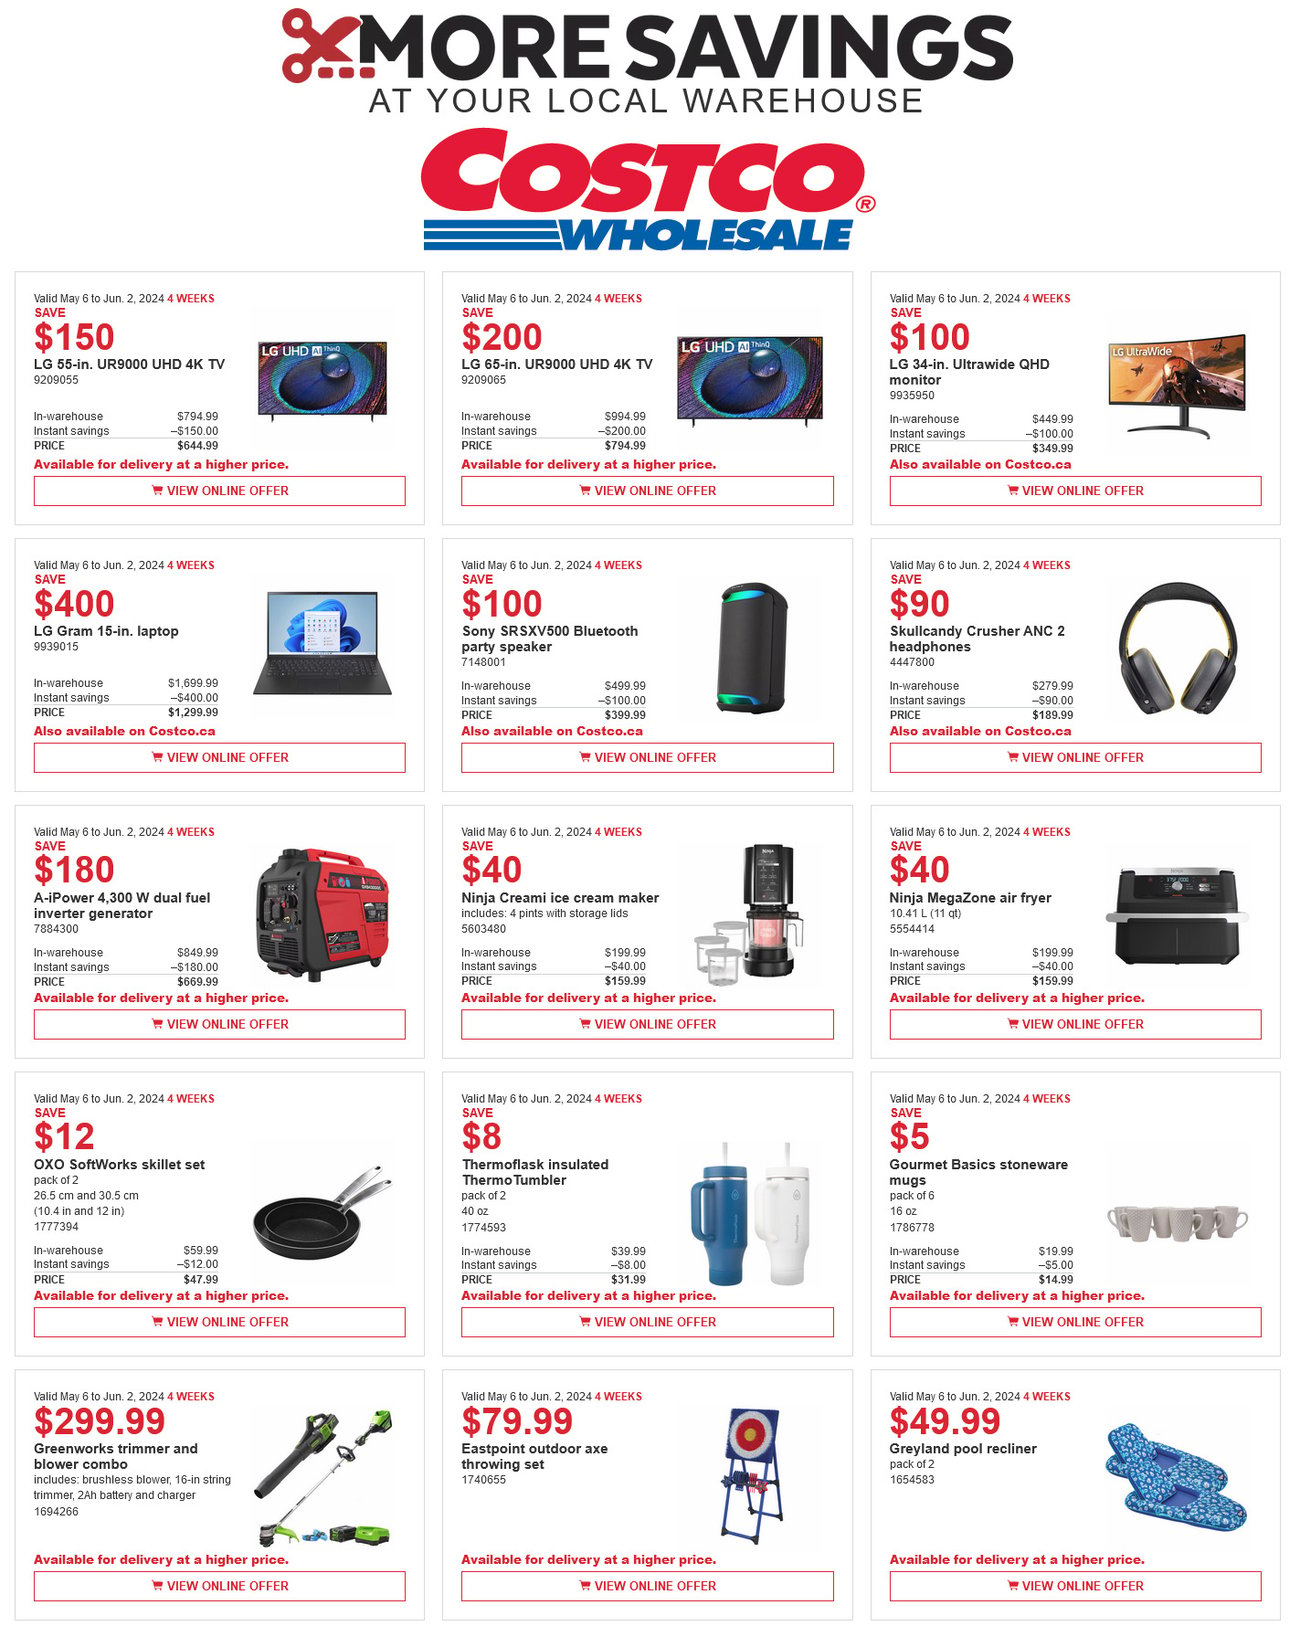 Costco Flyer - Savings & Coupons at your Local Warehouse and Online - Page 1